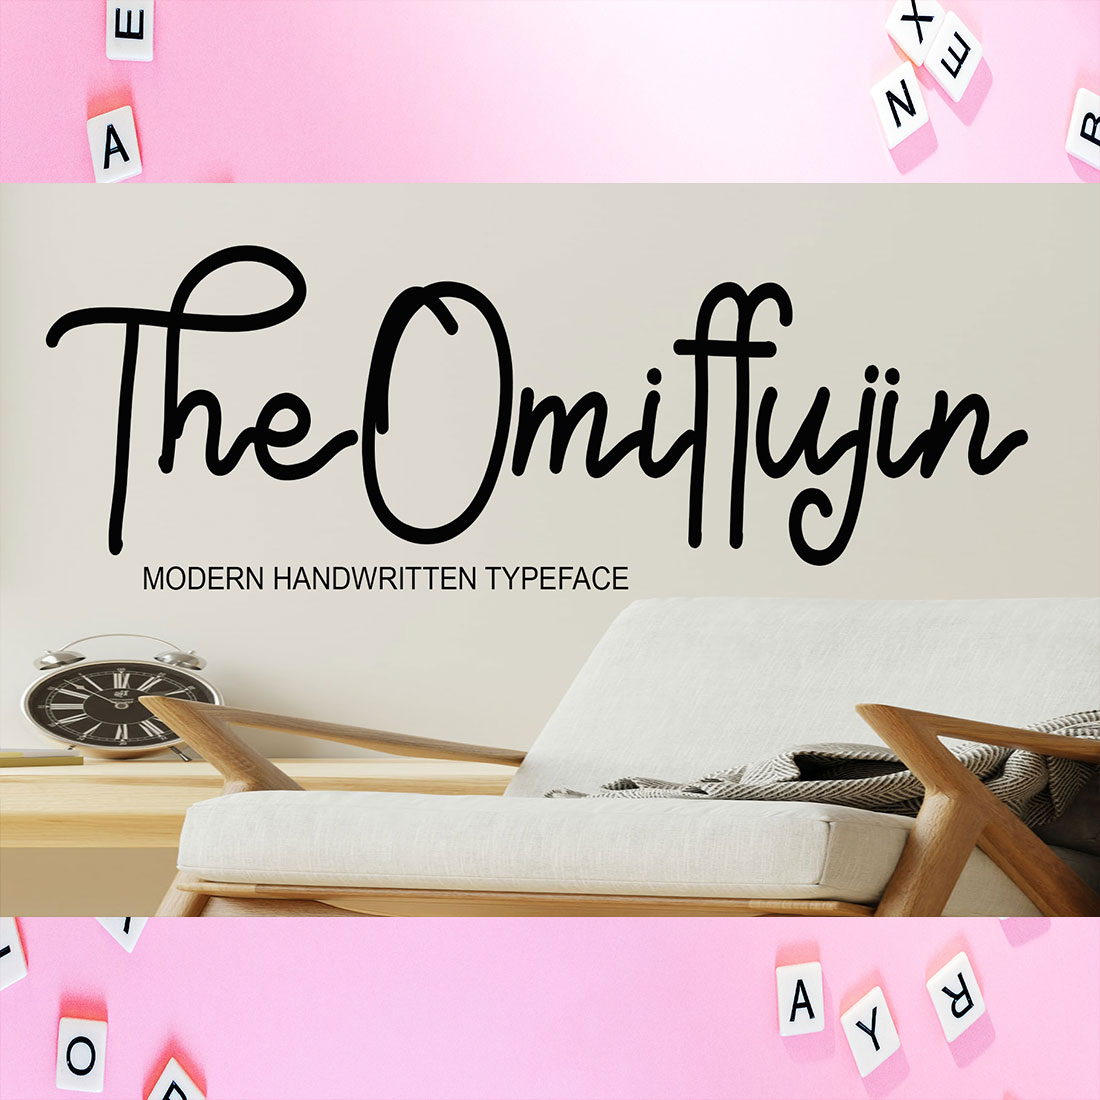 The Omiffujin adorable font cover.